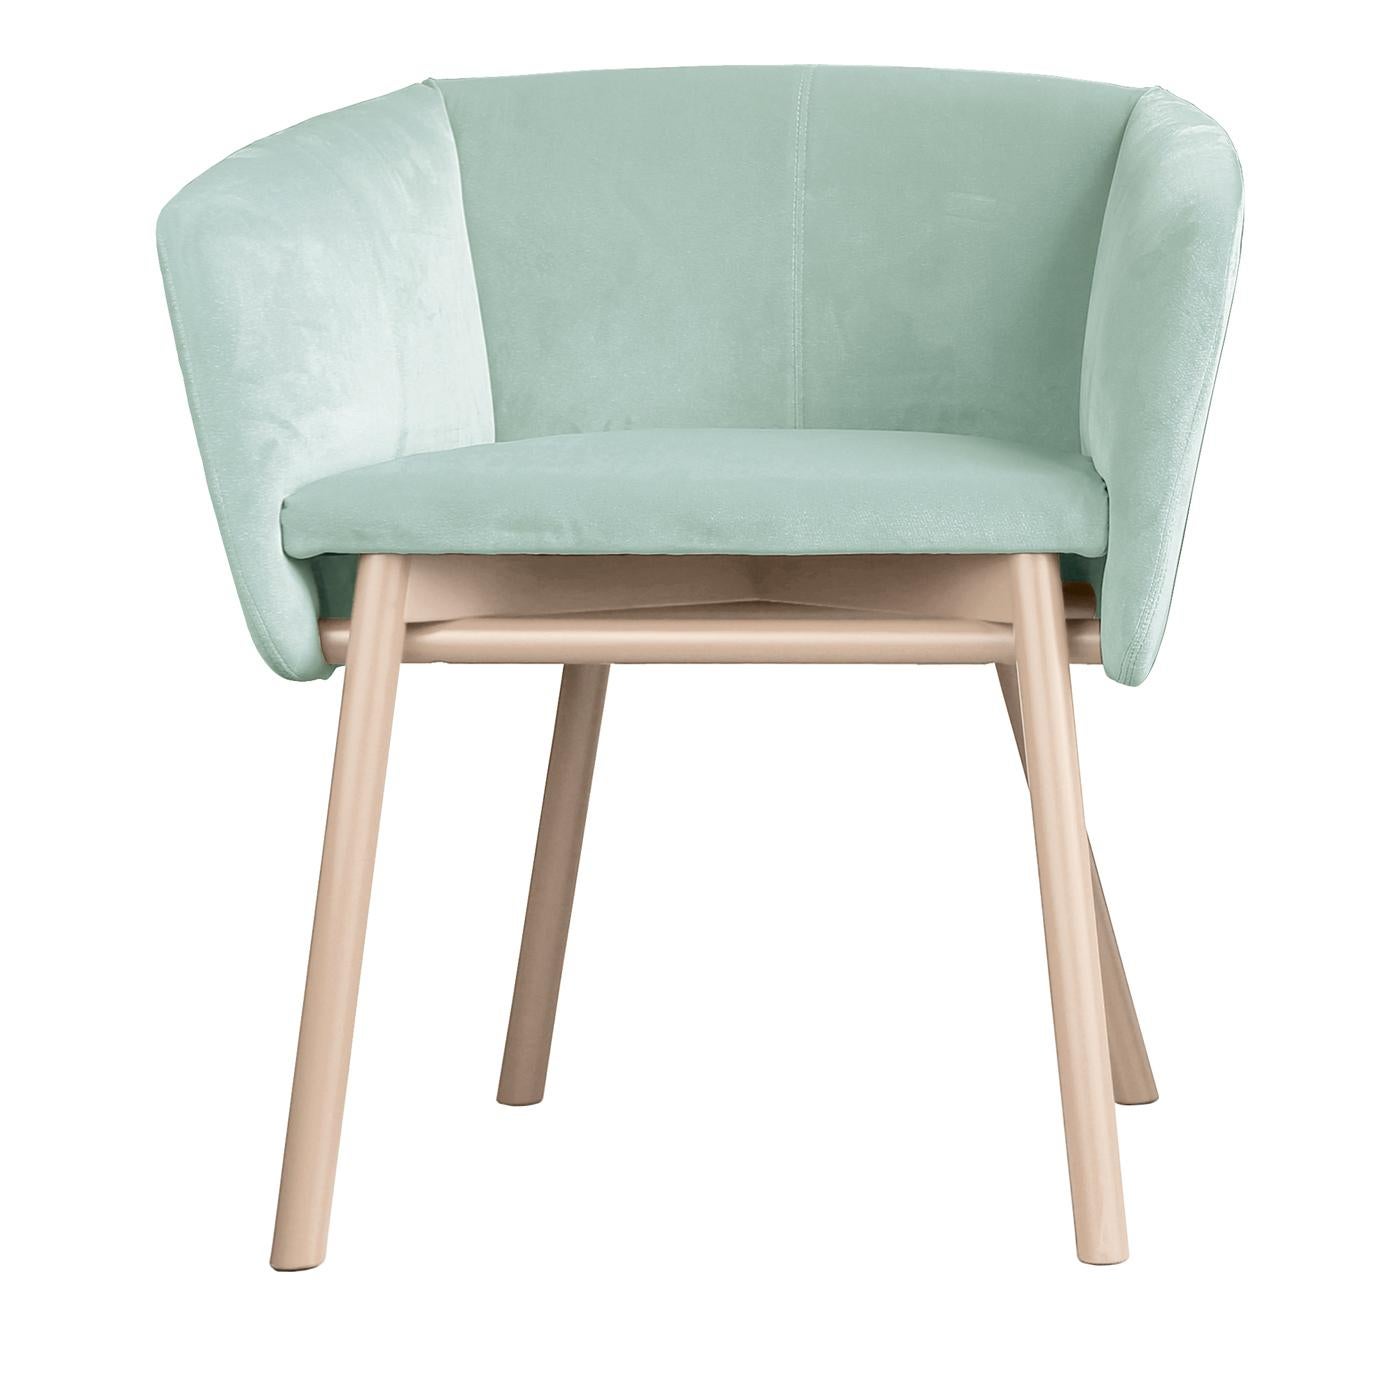 Refined and comfortable, this elegant armchair features an interlocking structure in bleached beechwood with slanted legs, and a sumptuous seat in a pale green delicate hue, with enveloping arms and backseat reminiscent of the traditional tub chair.